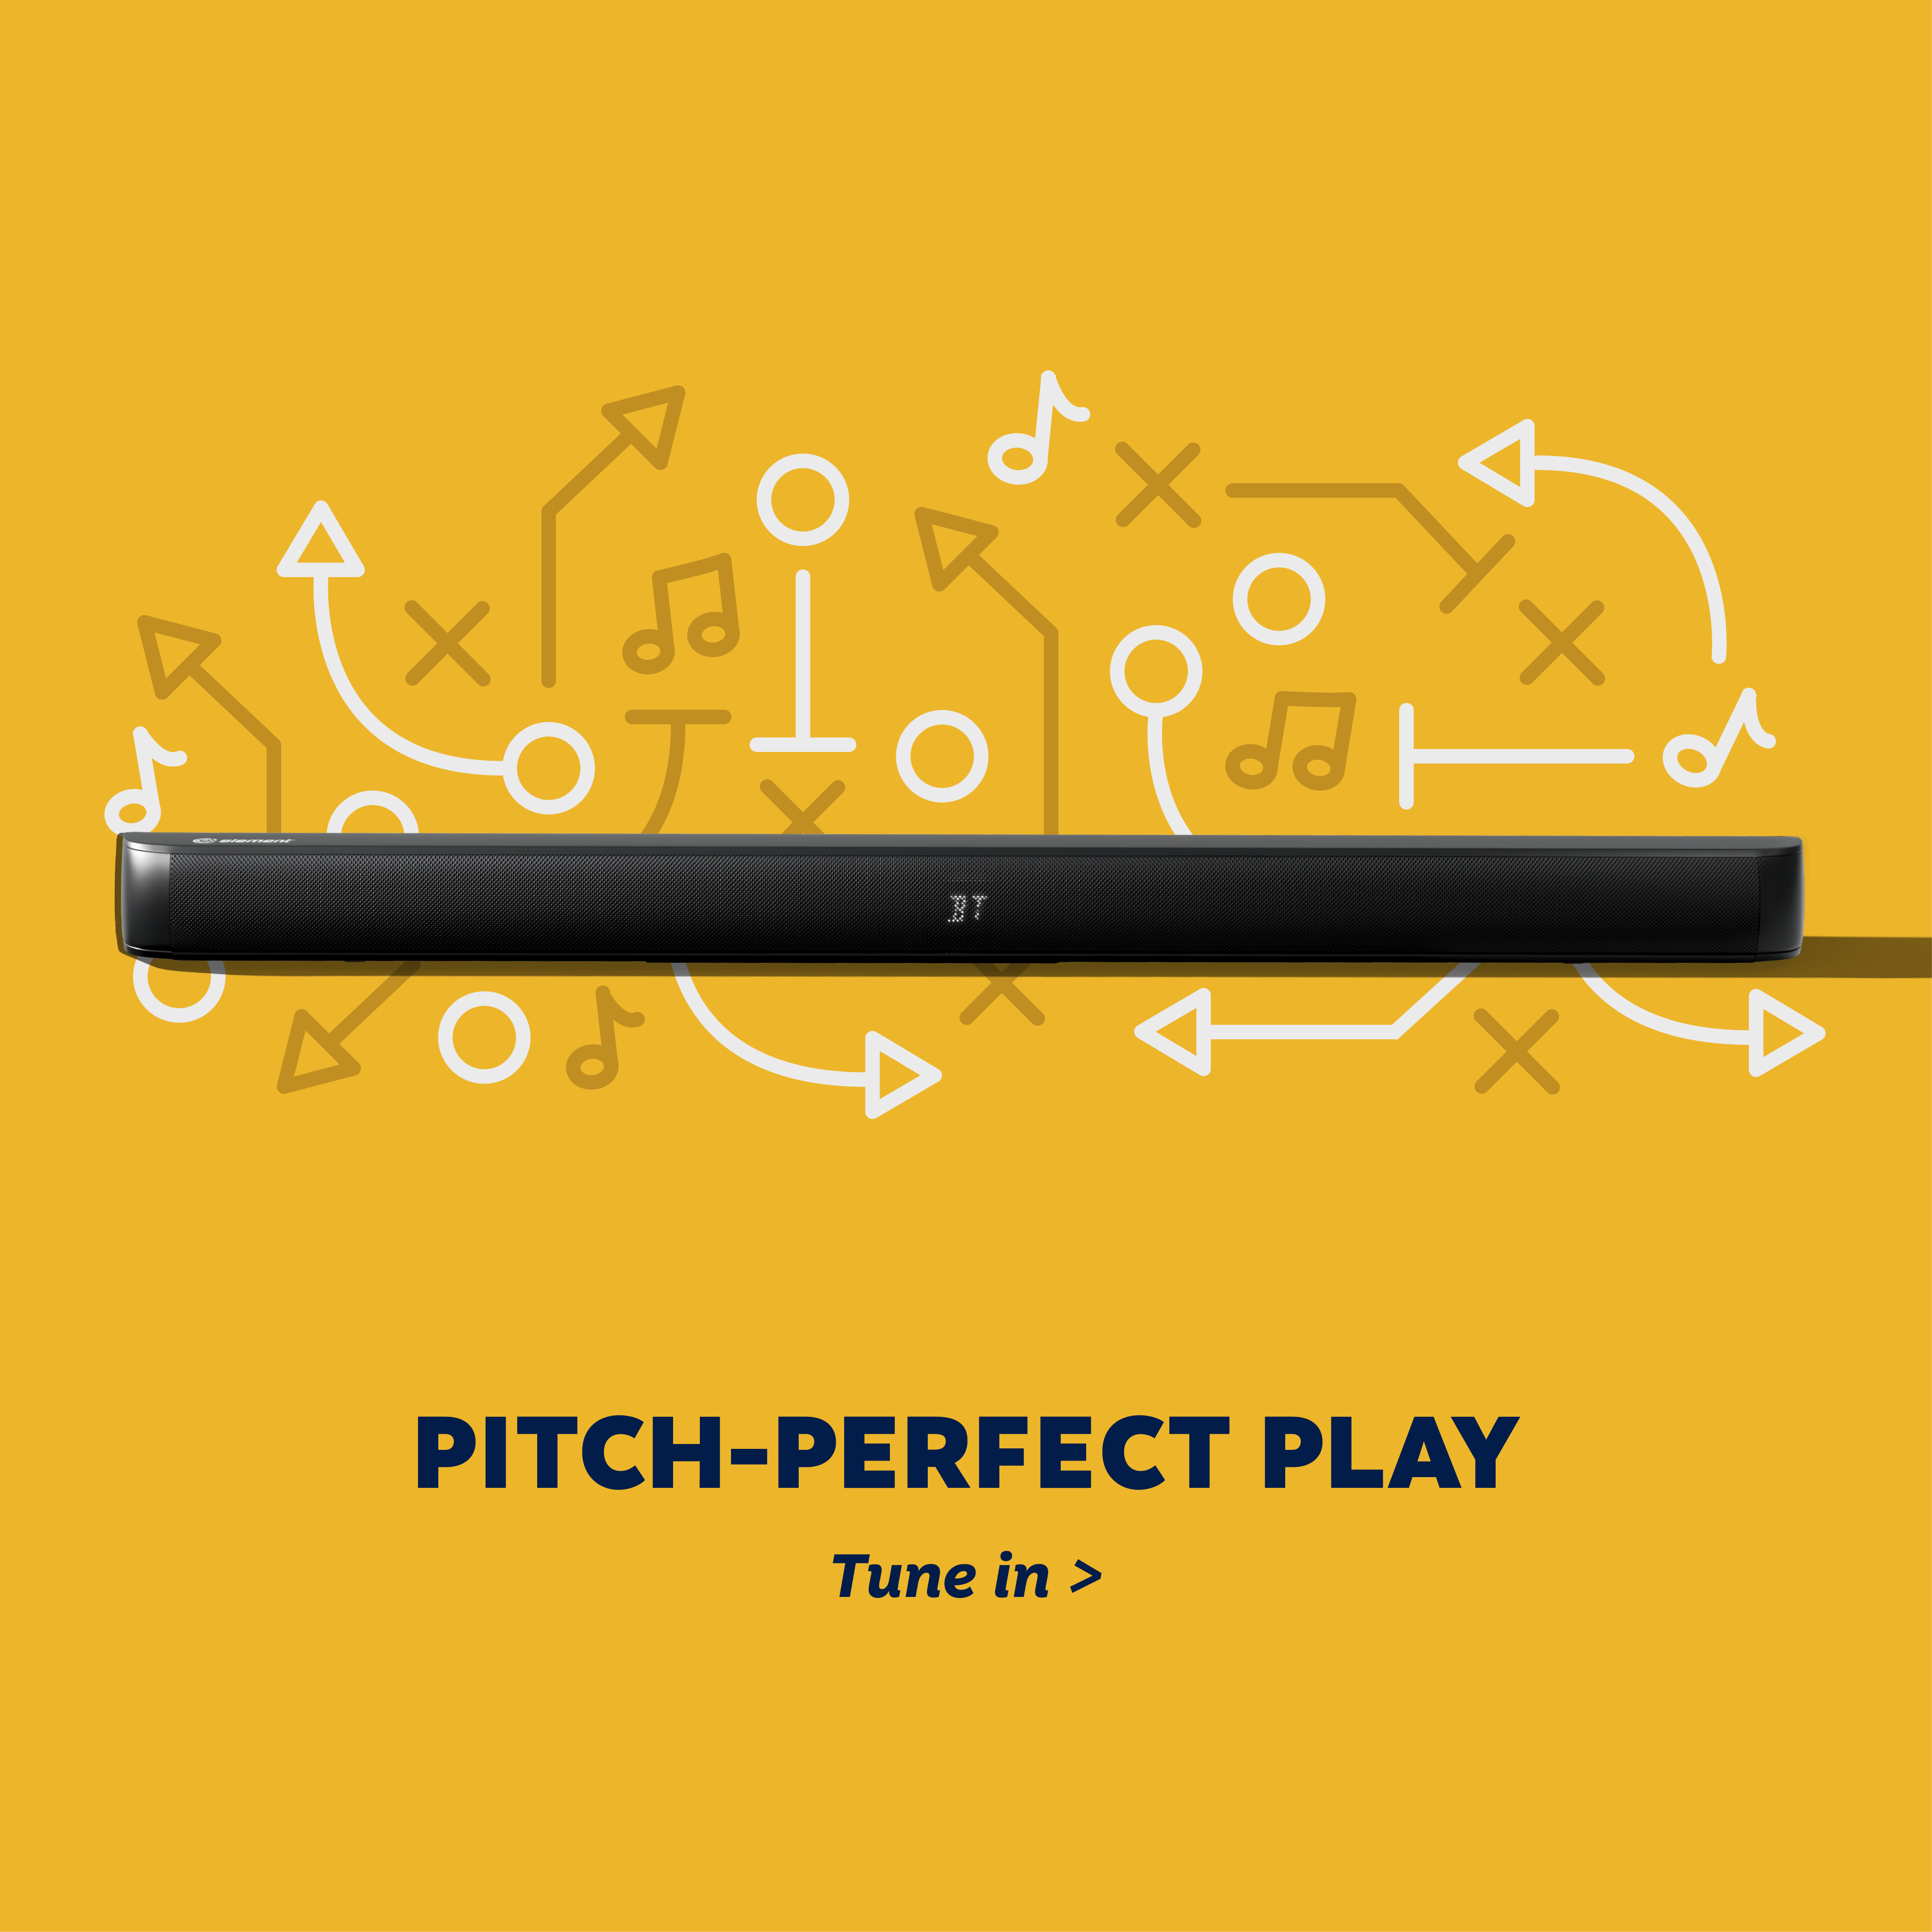 Image of sound bar with football themed X's and O's with text "pitch-perfect play."